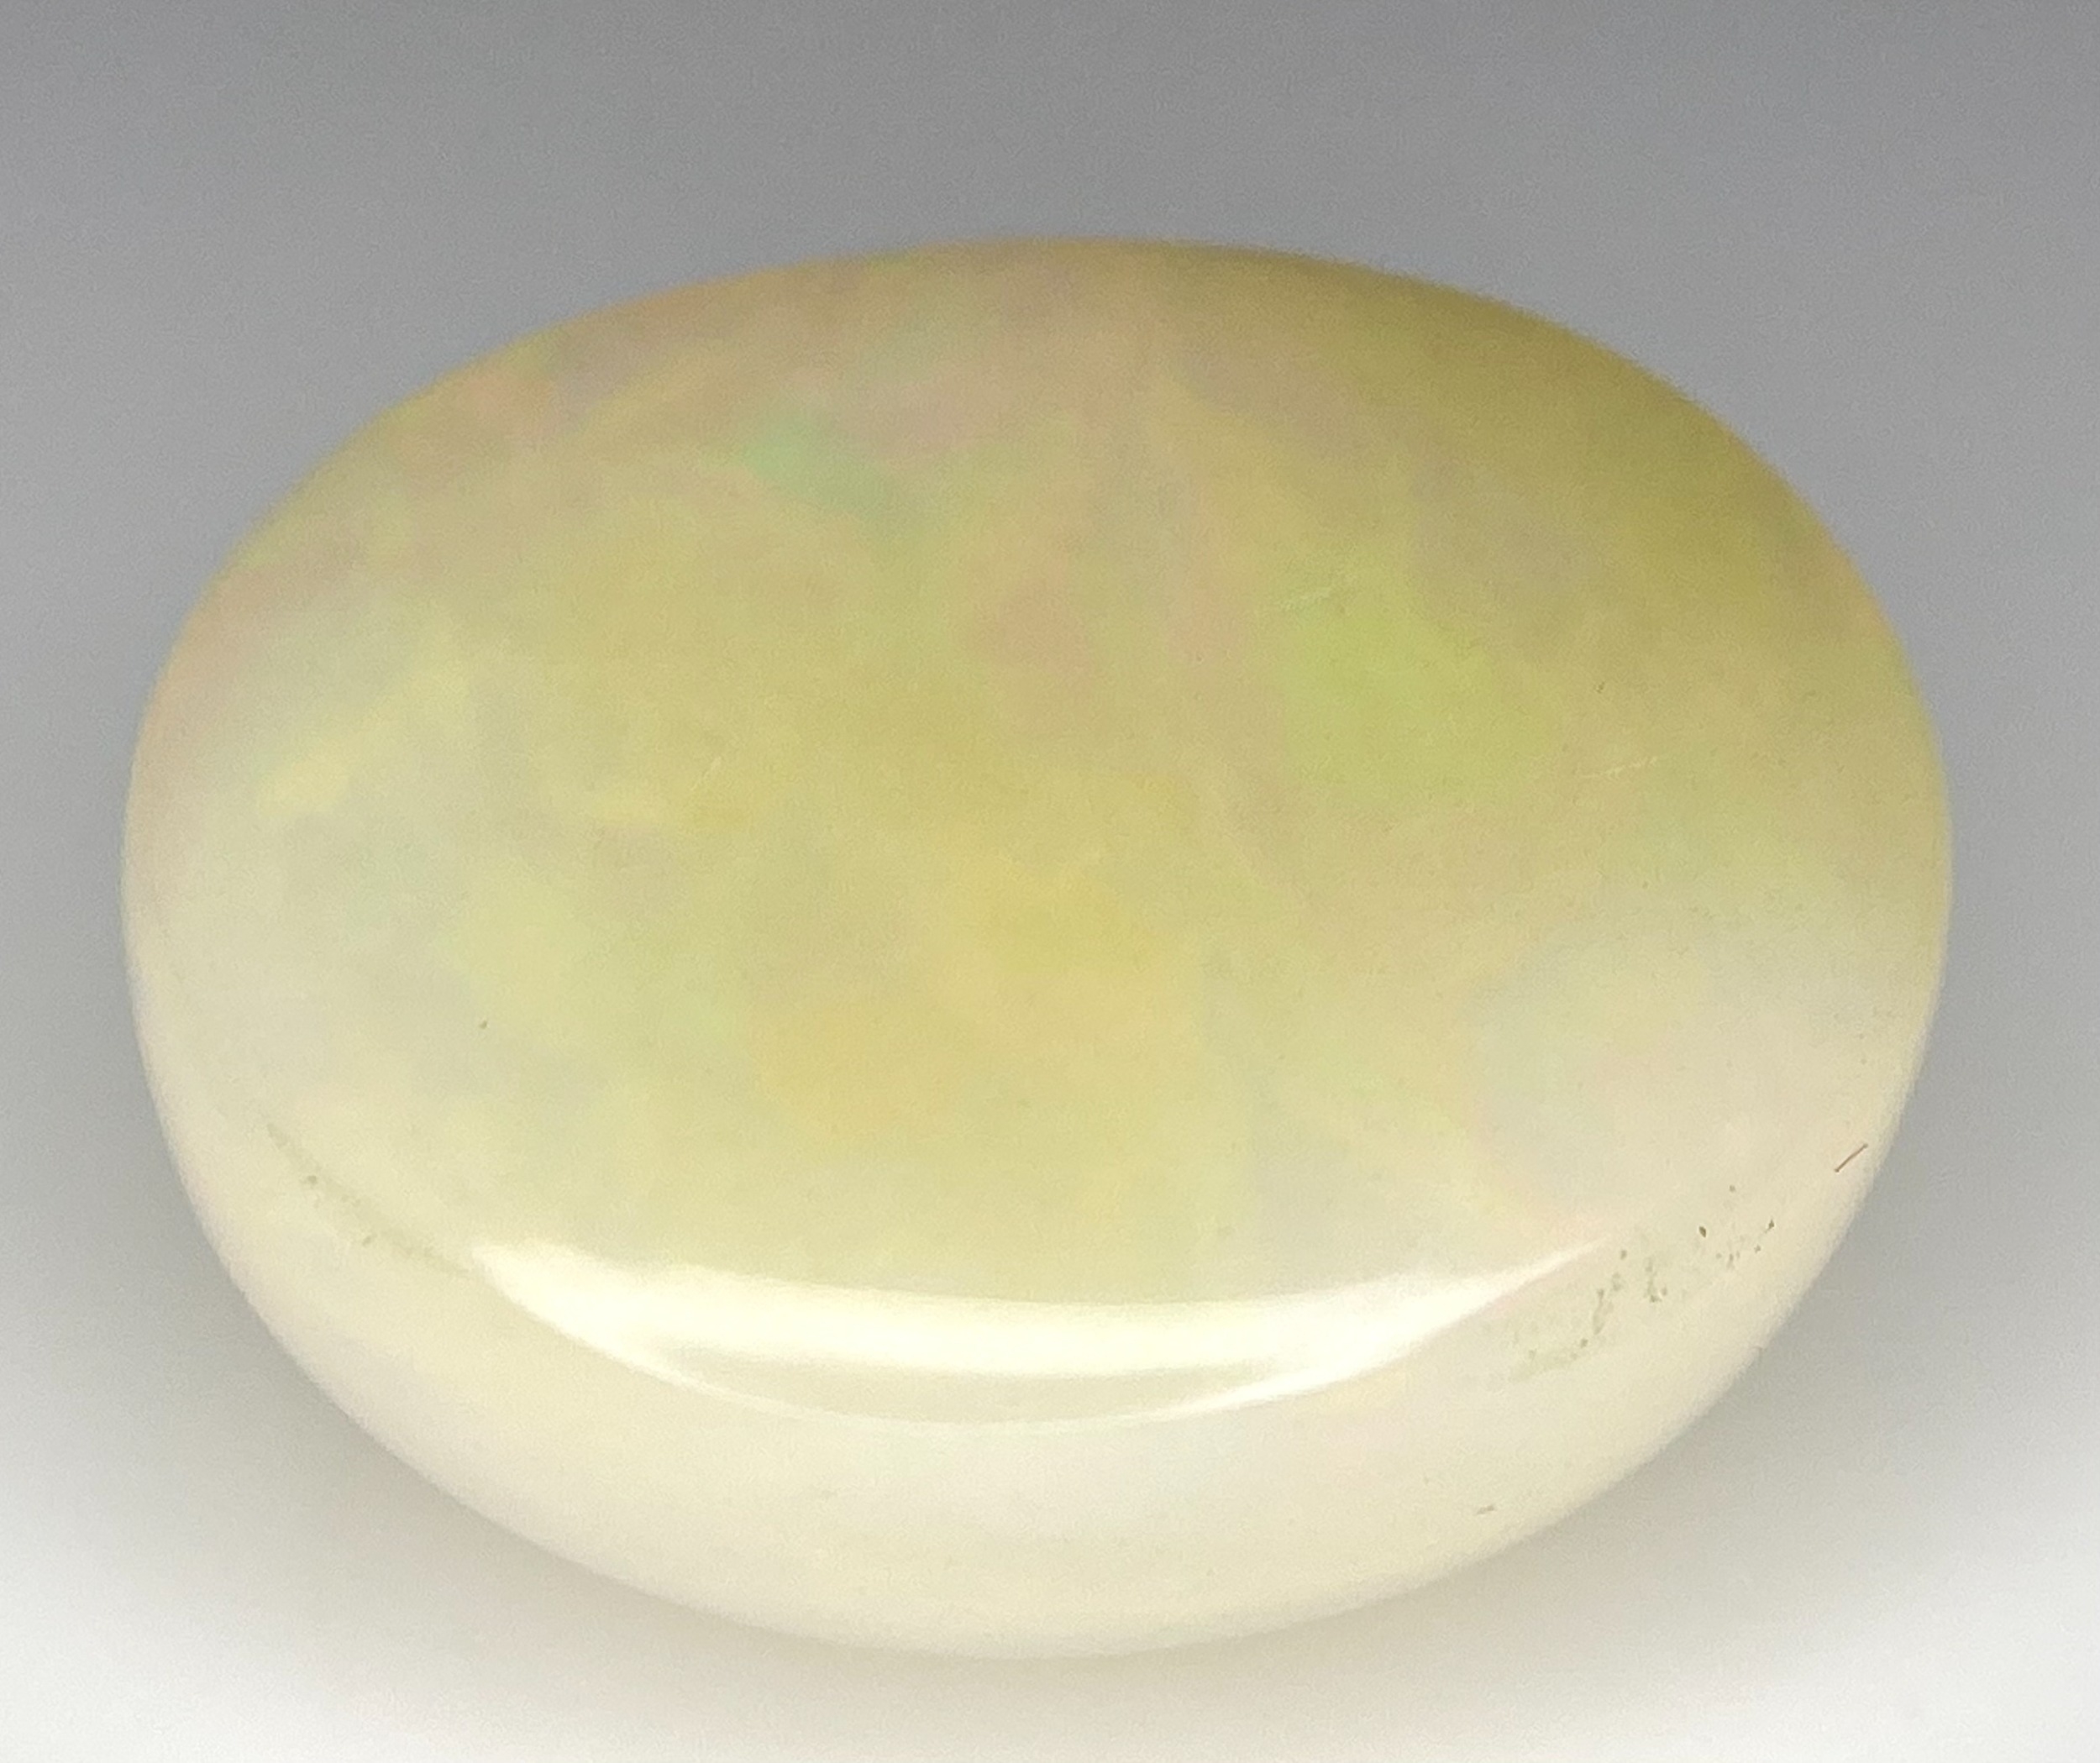 An 18.14ct Large Ethiopian Opal Gemstone - ITLGR Certified. - Image 2 of 4